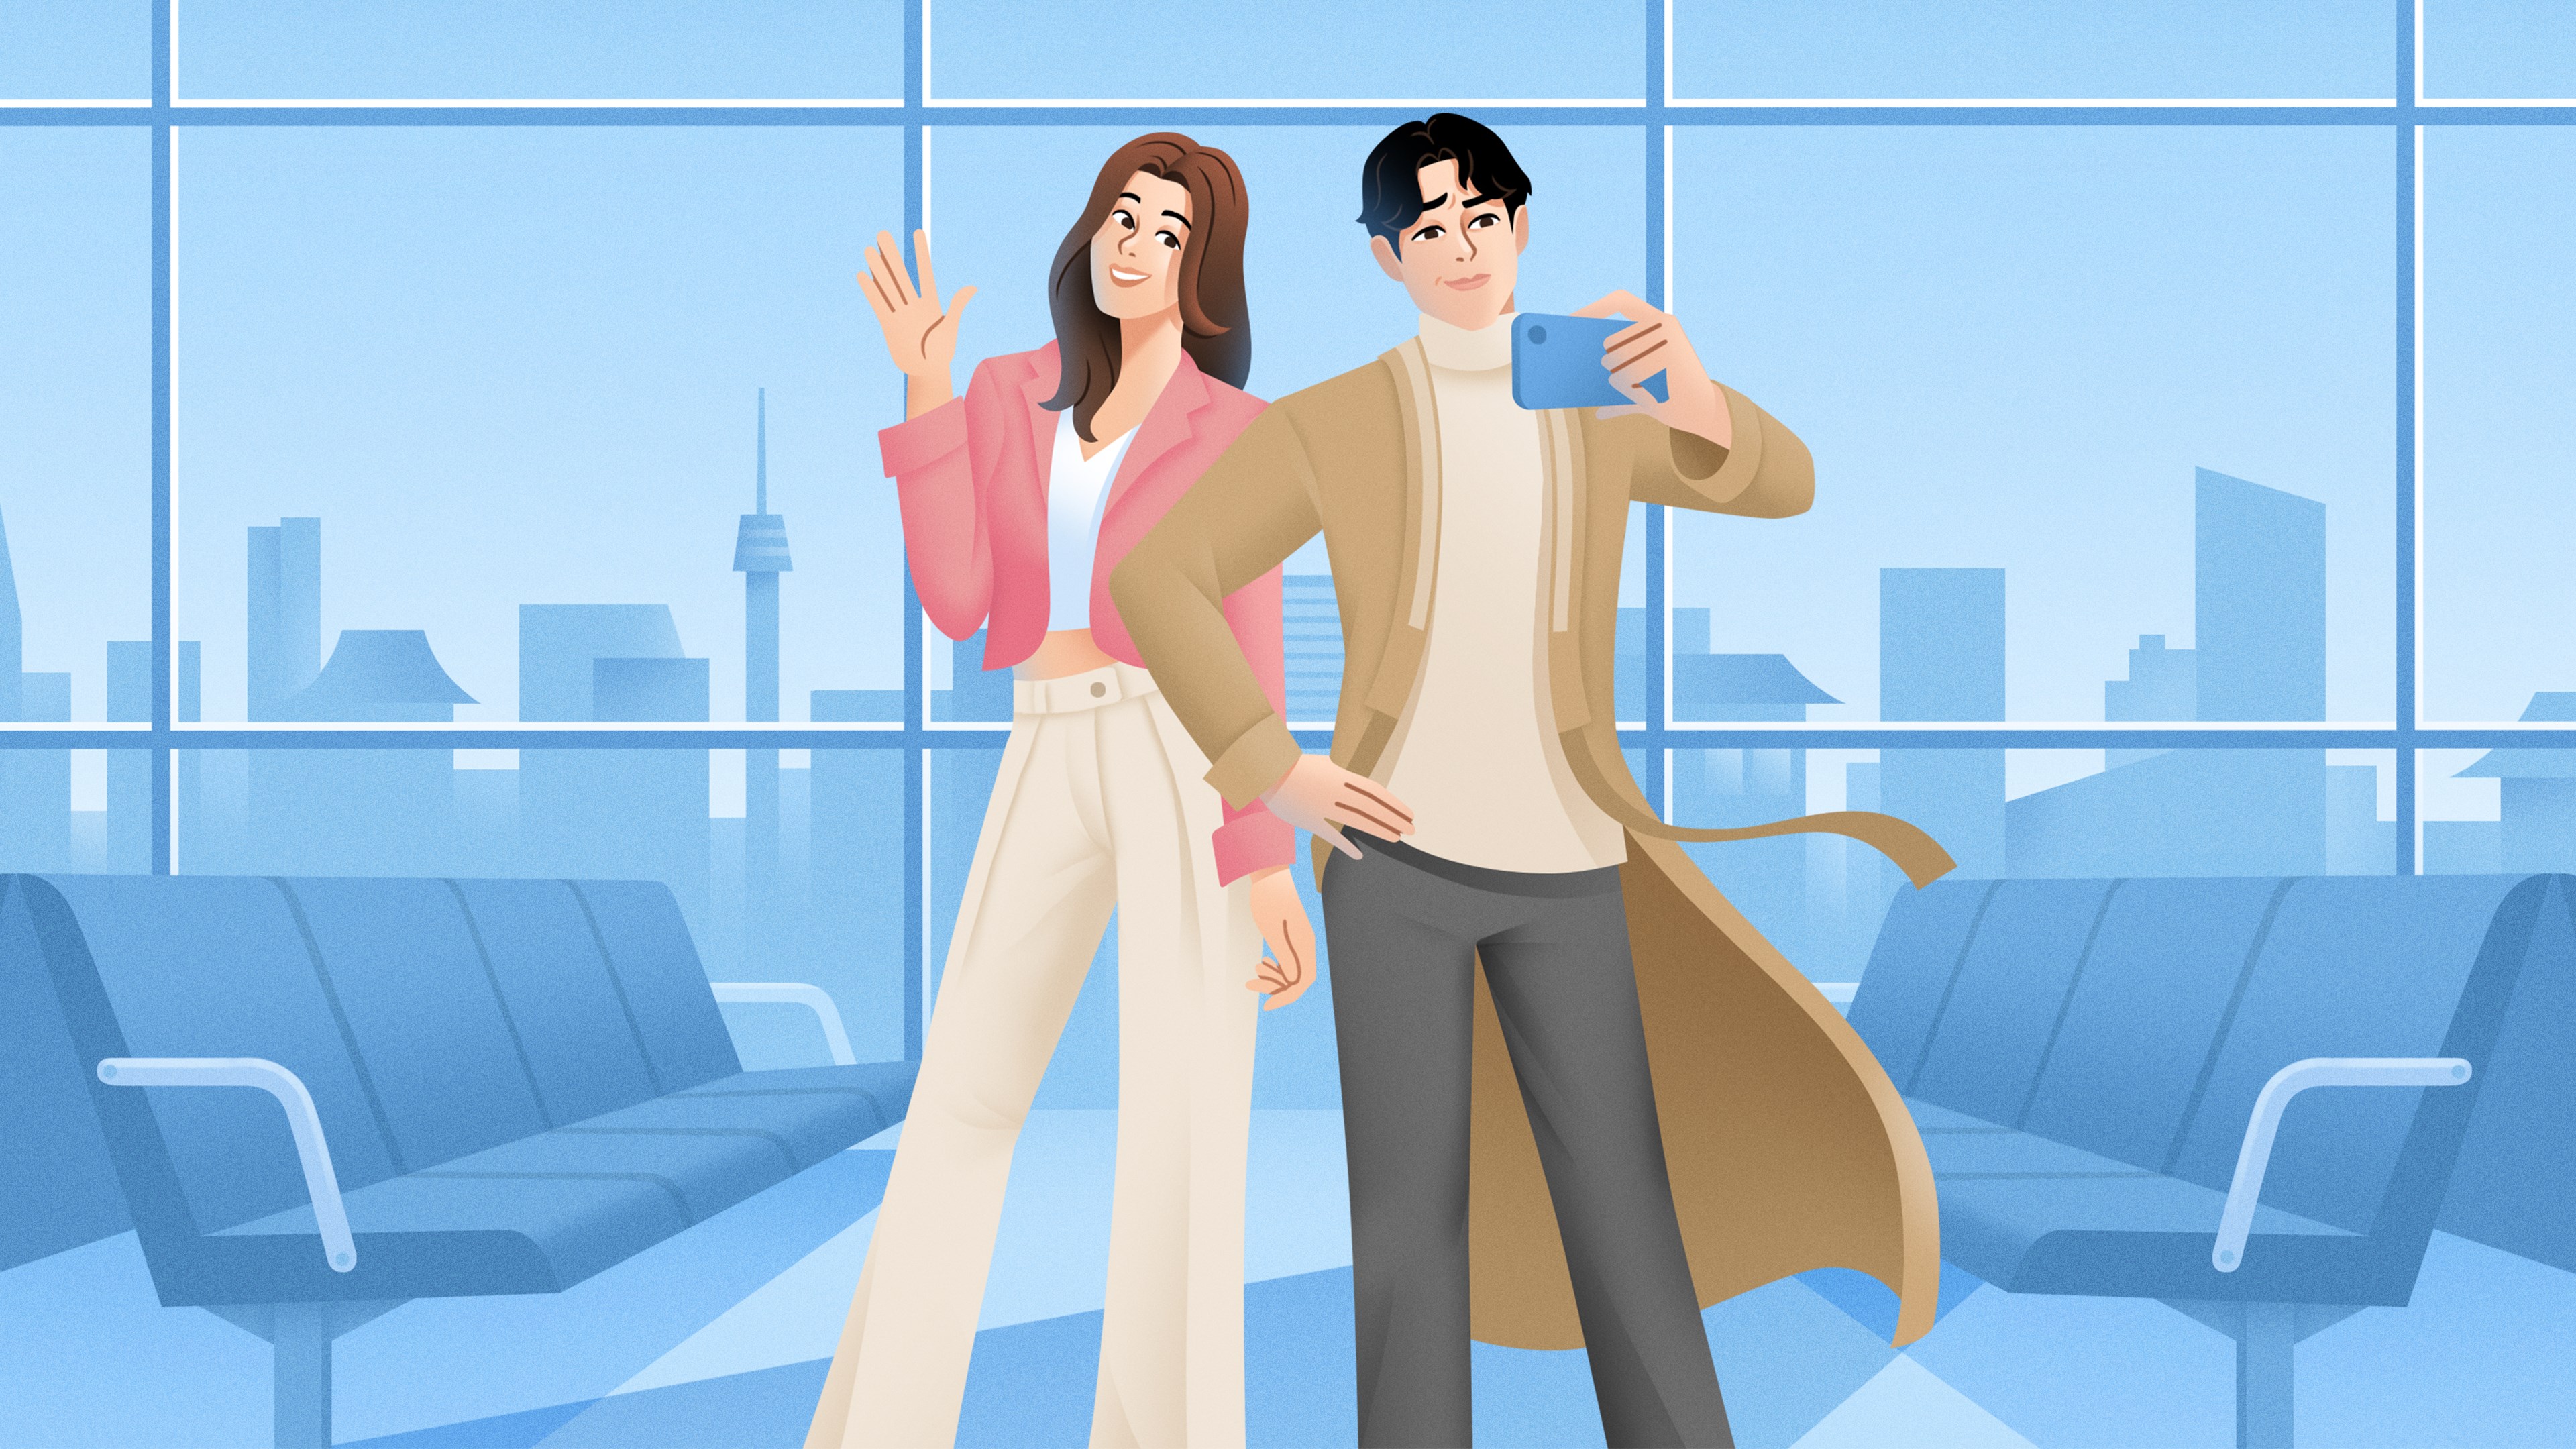 Game about sex in Incheon